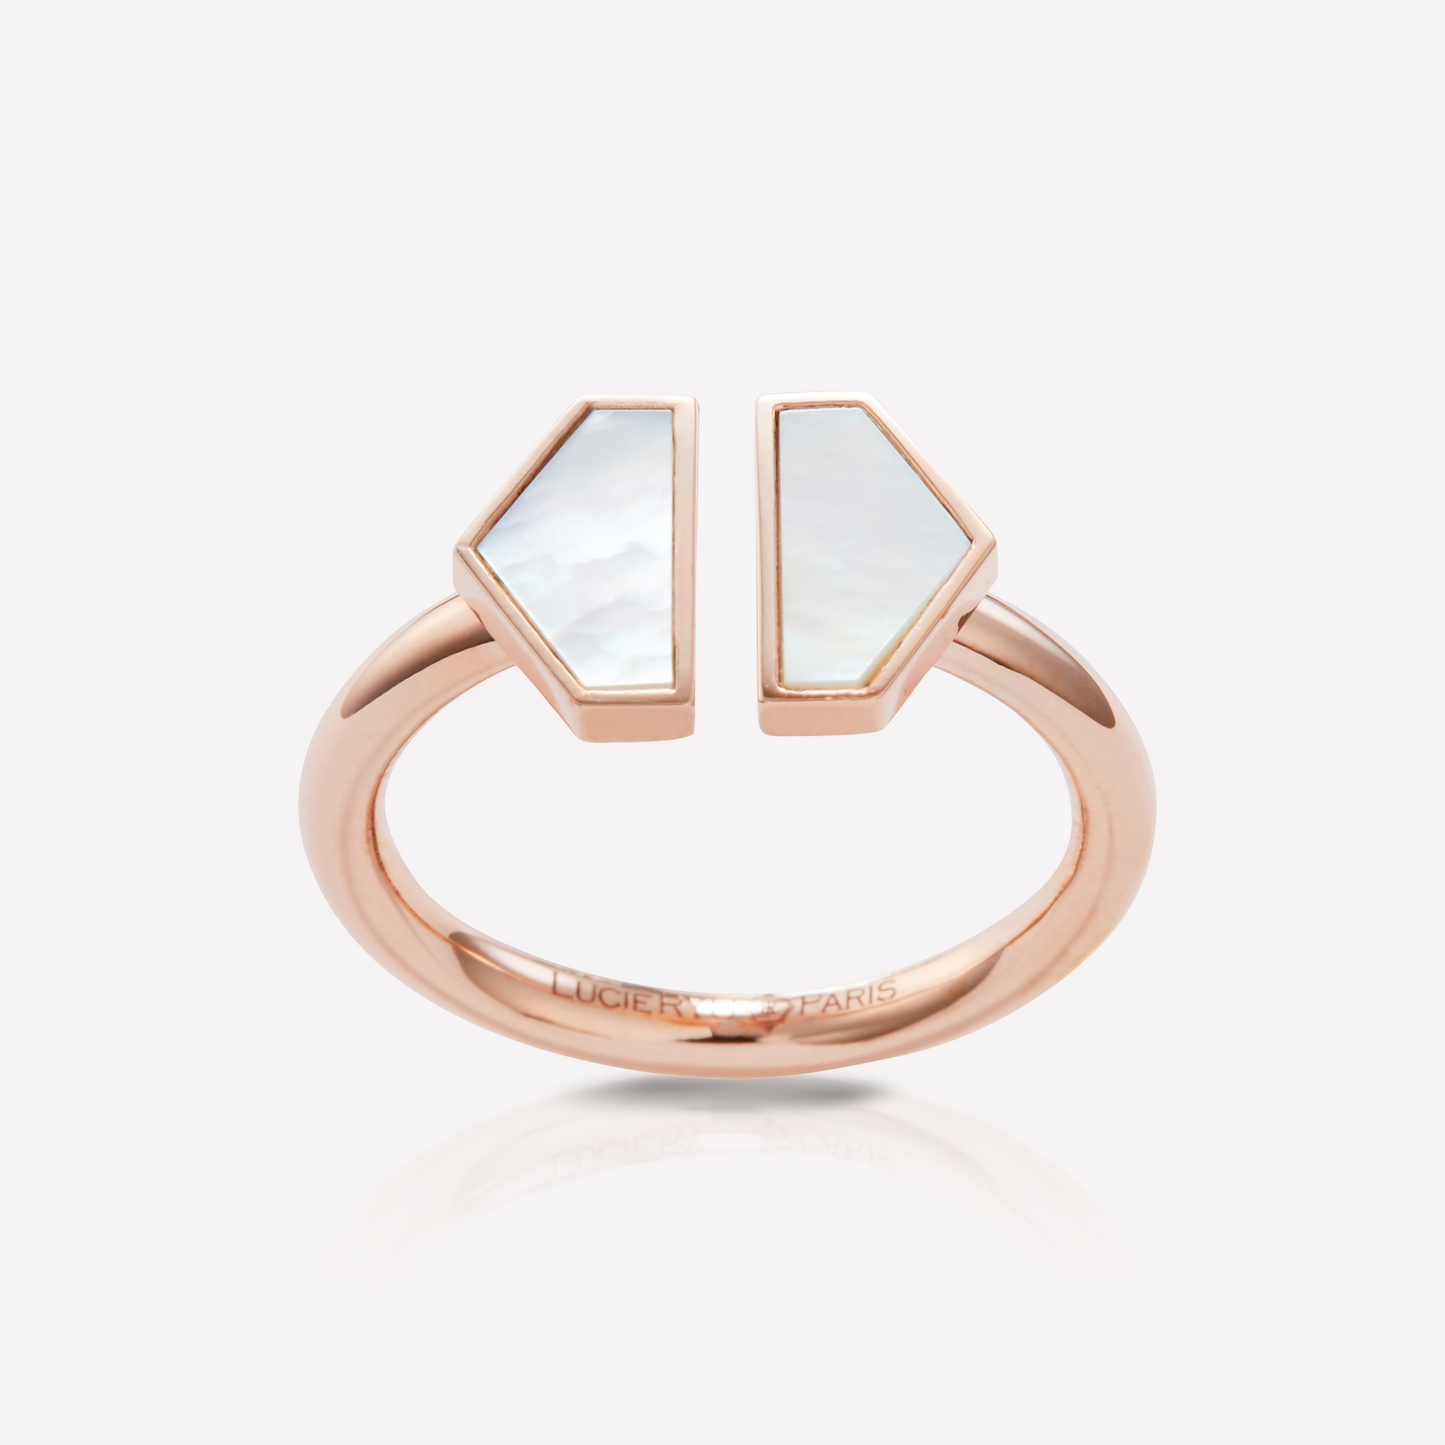 VOID Filled By You Bague, Grand, Nacre Blanc